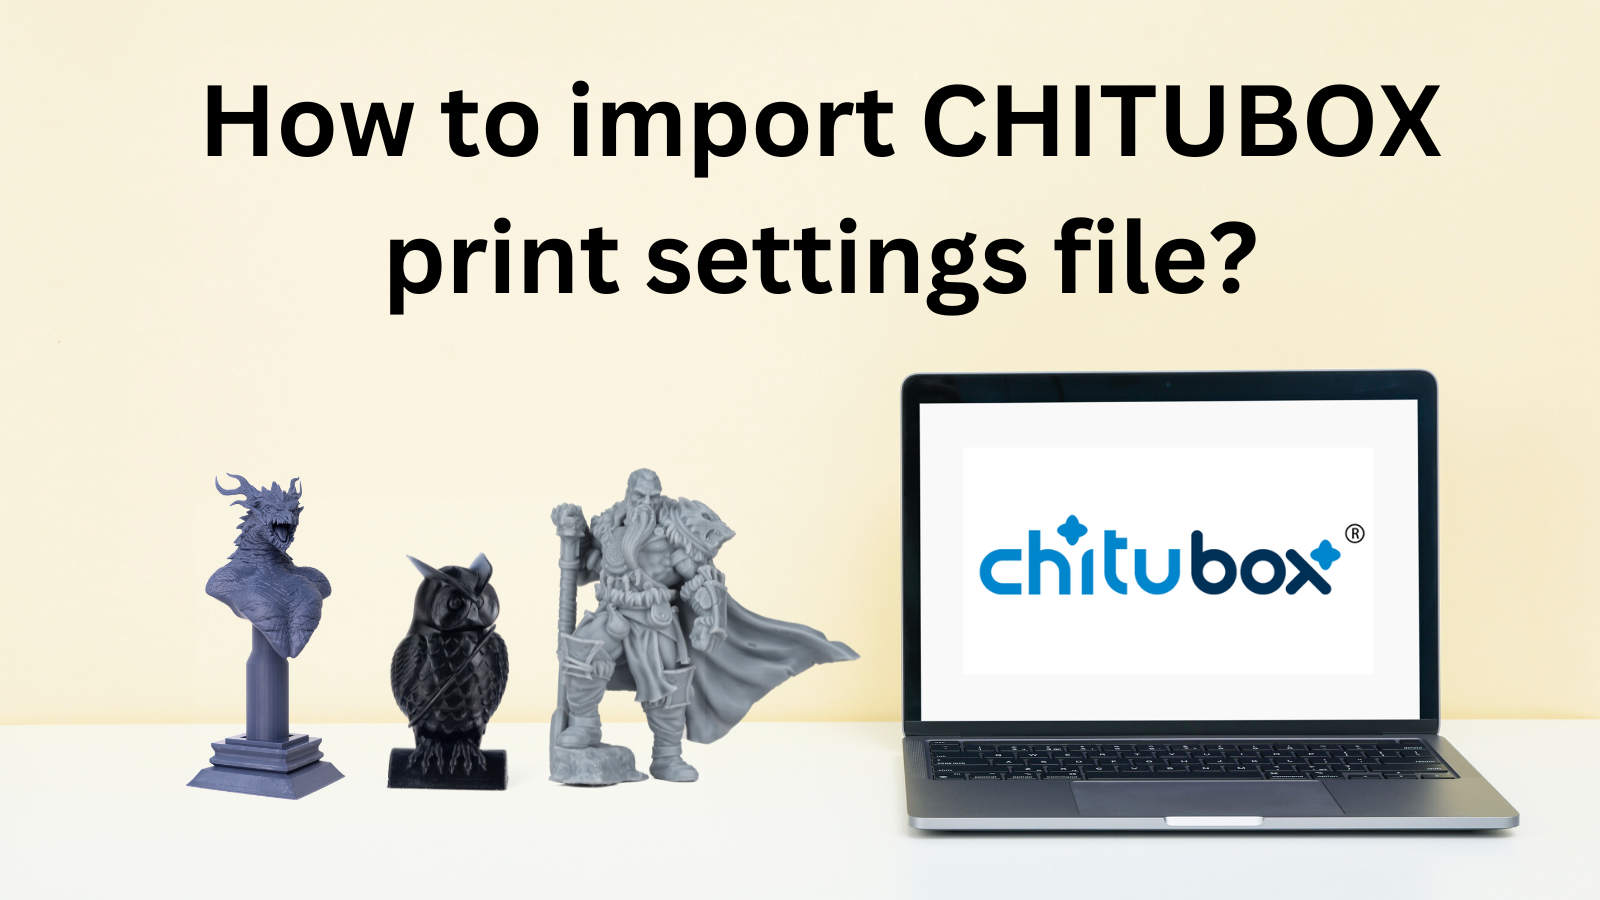 How to import CHITUBOX print settings file?